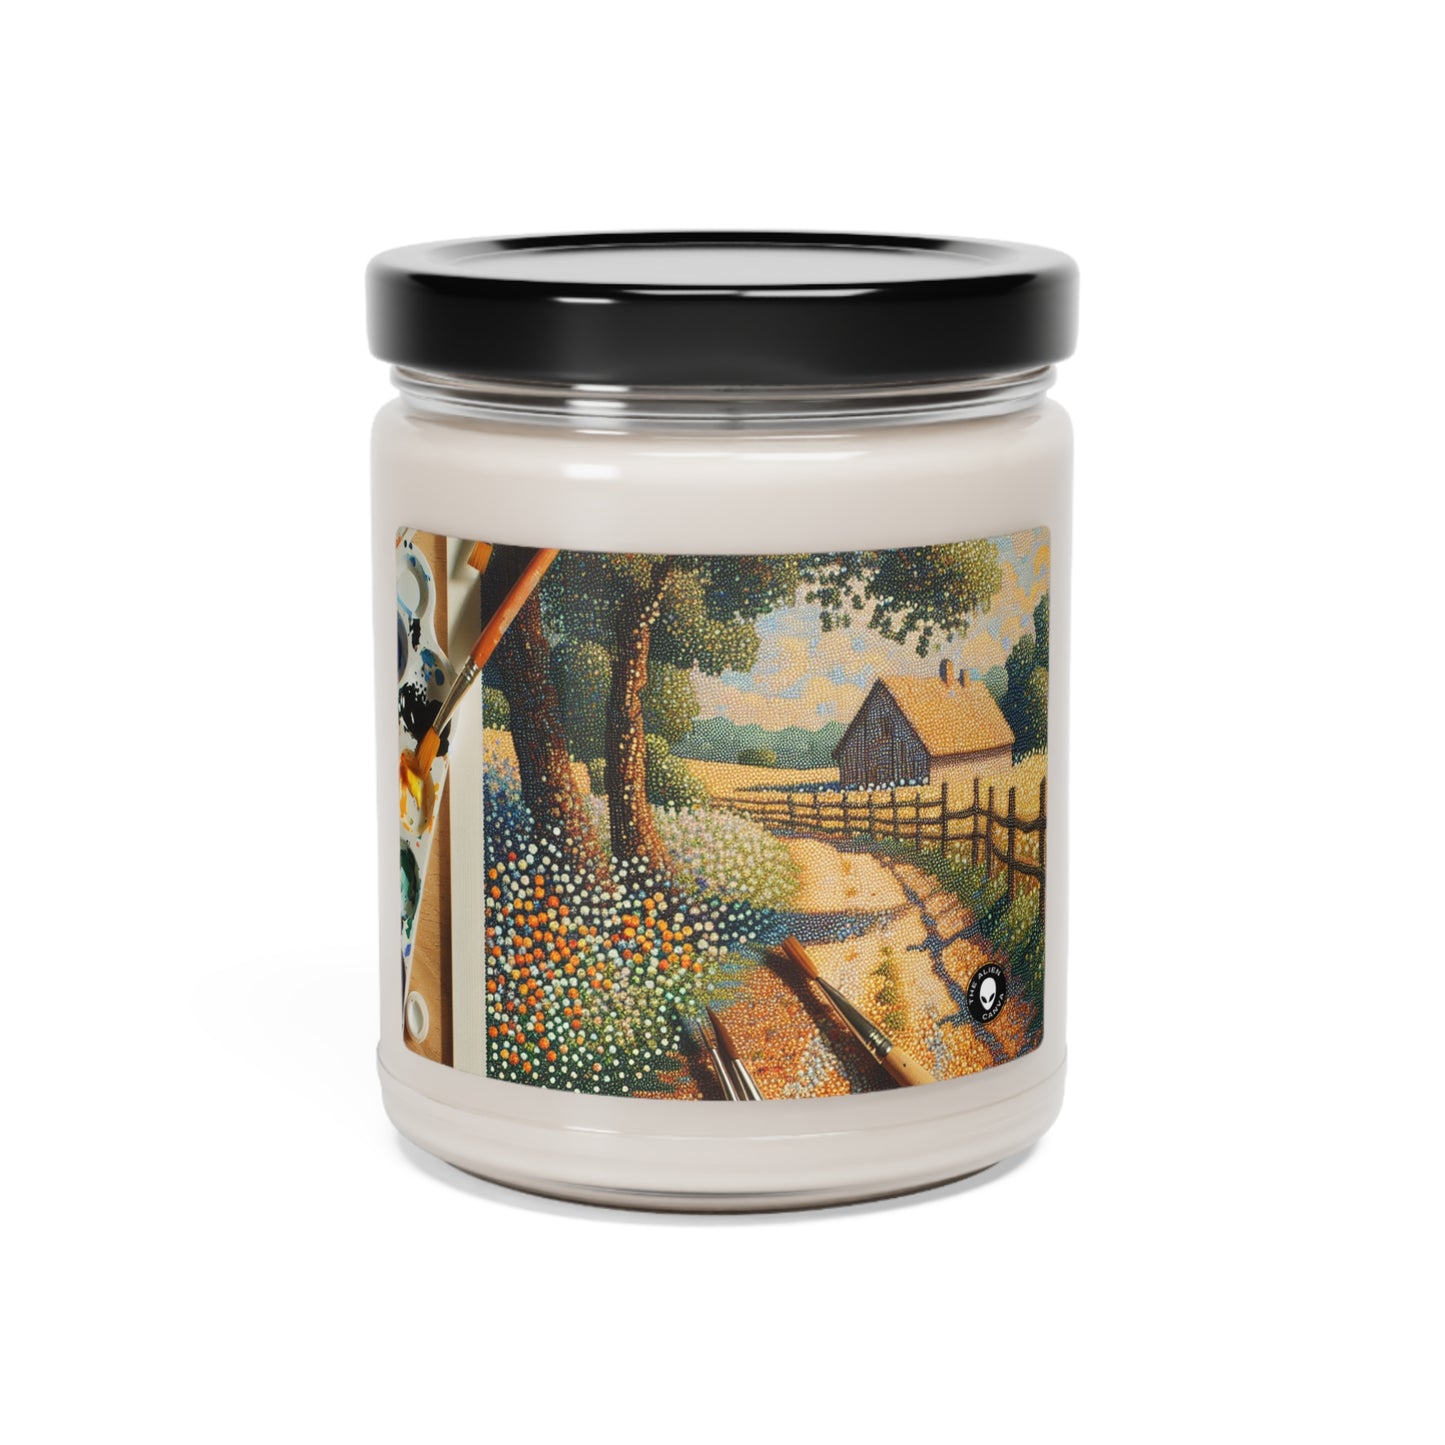 "Autumn Bliss: Pointillism Forest" - The Alien Scented Soy Candle 9oz Pointillism